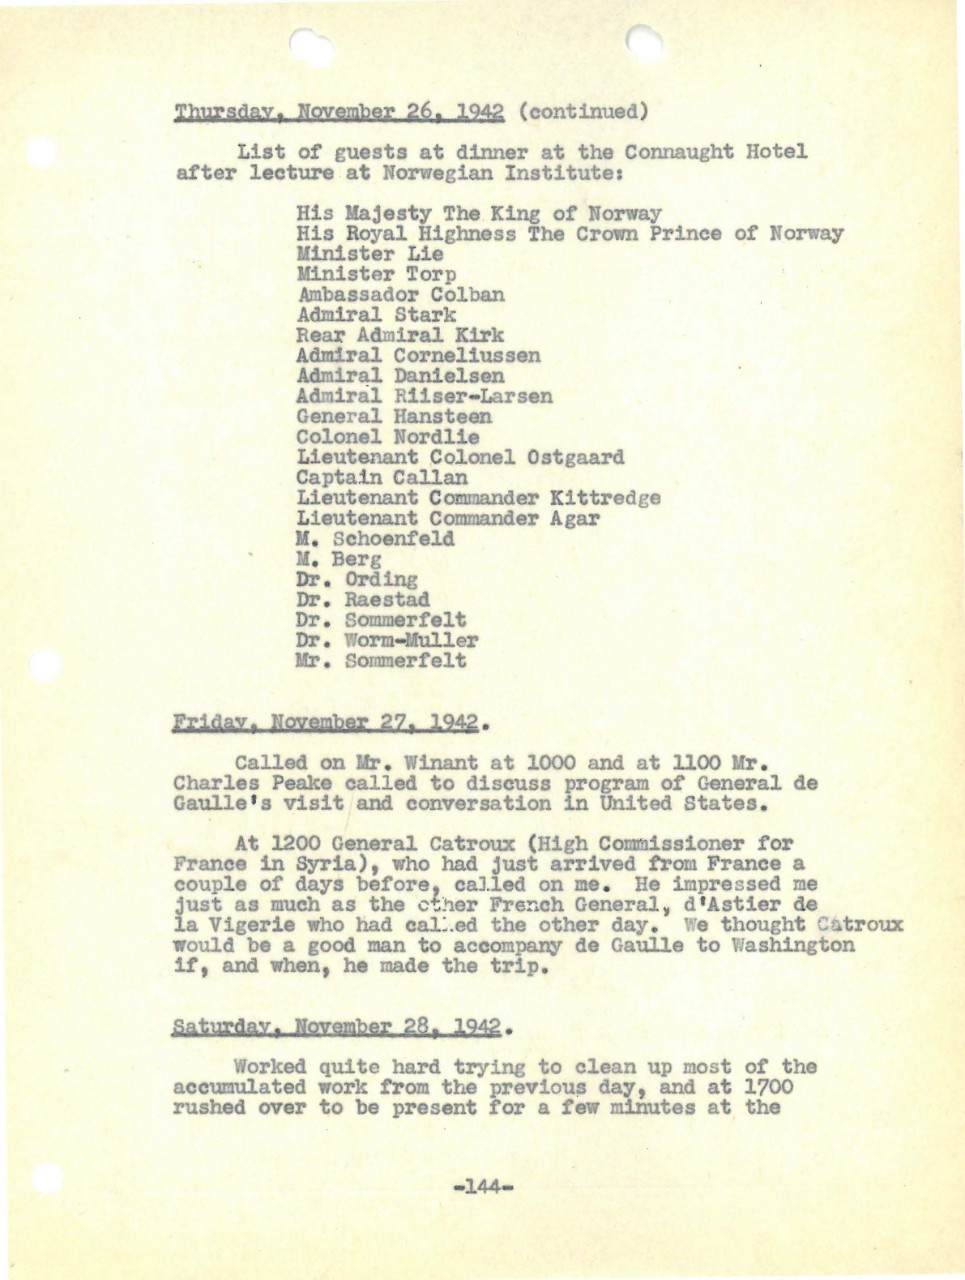 <p>Admiral Stark's Diary Entry for Thanksgiving Day 1942, page 3</p>
